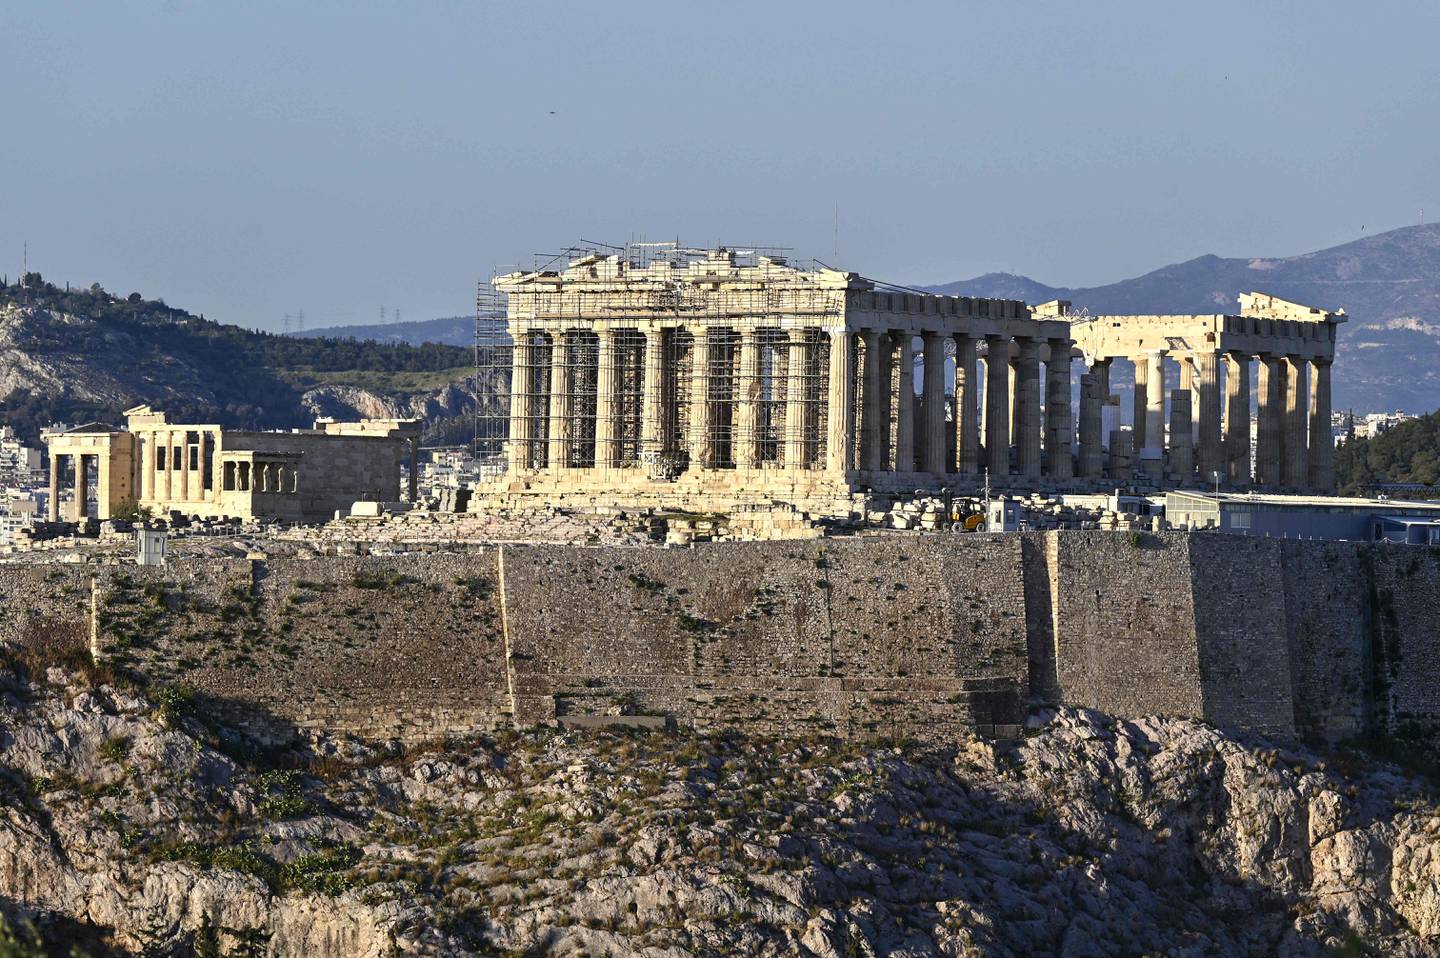 The Parthenon temple was built in the 5th century BC on the Acropolis to honour Athena AFP